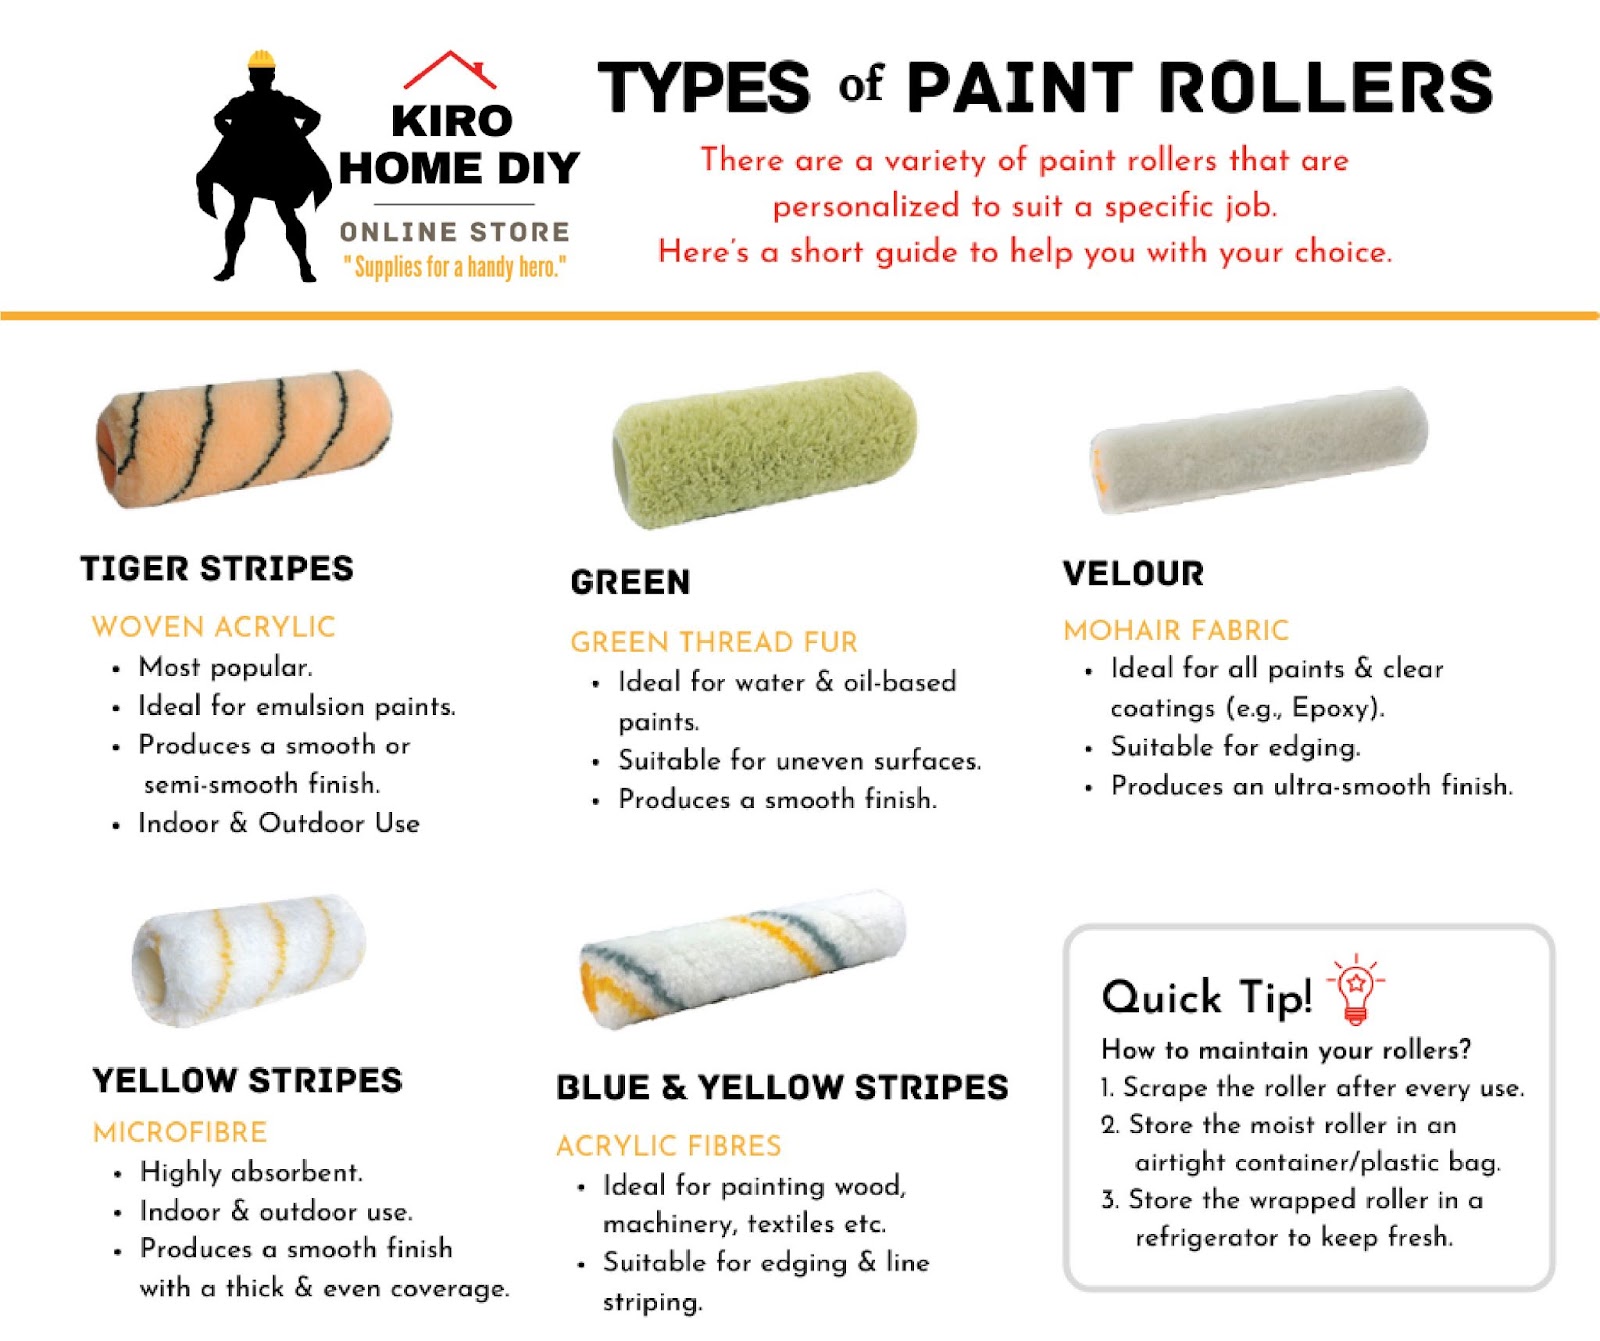 Popular Paint Rollers & Their Uses